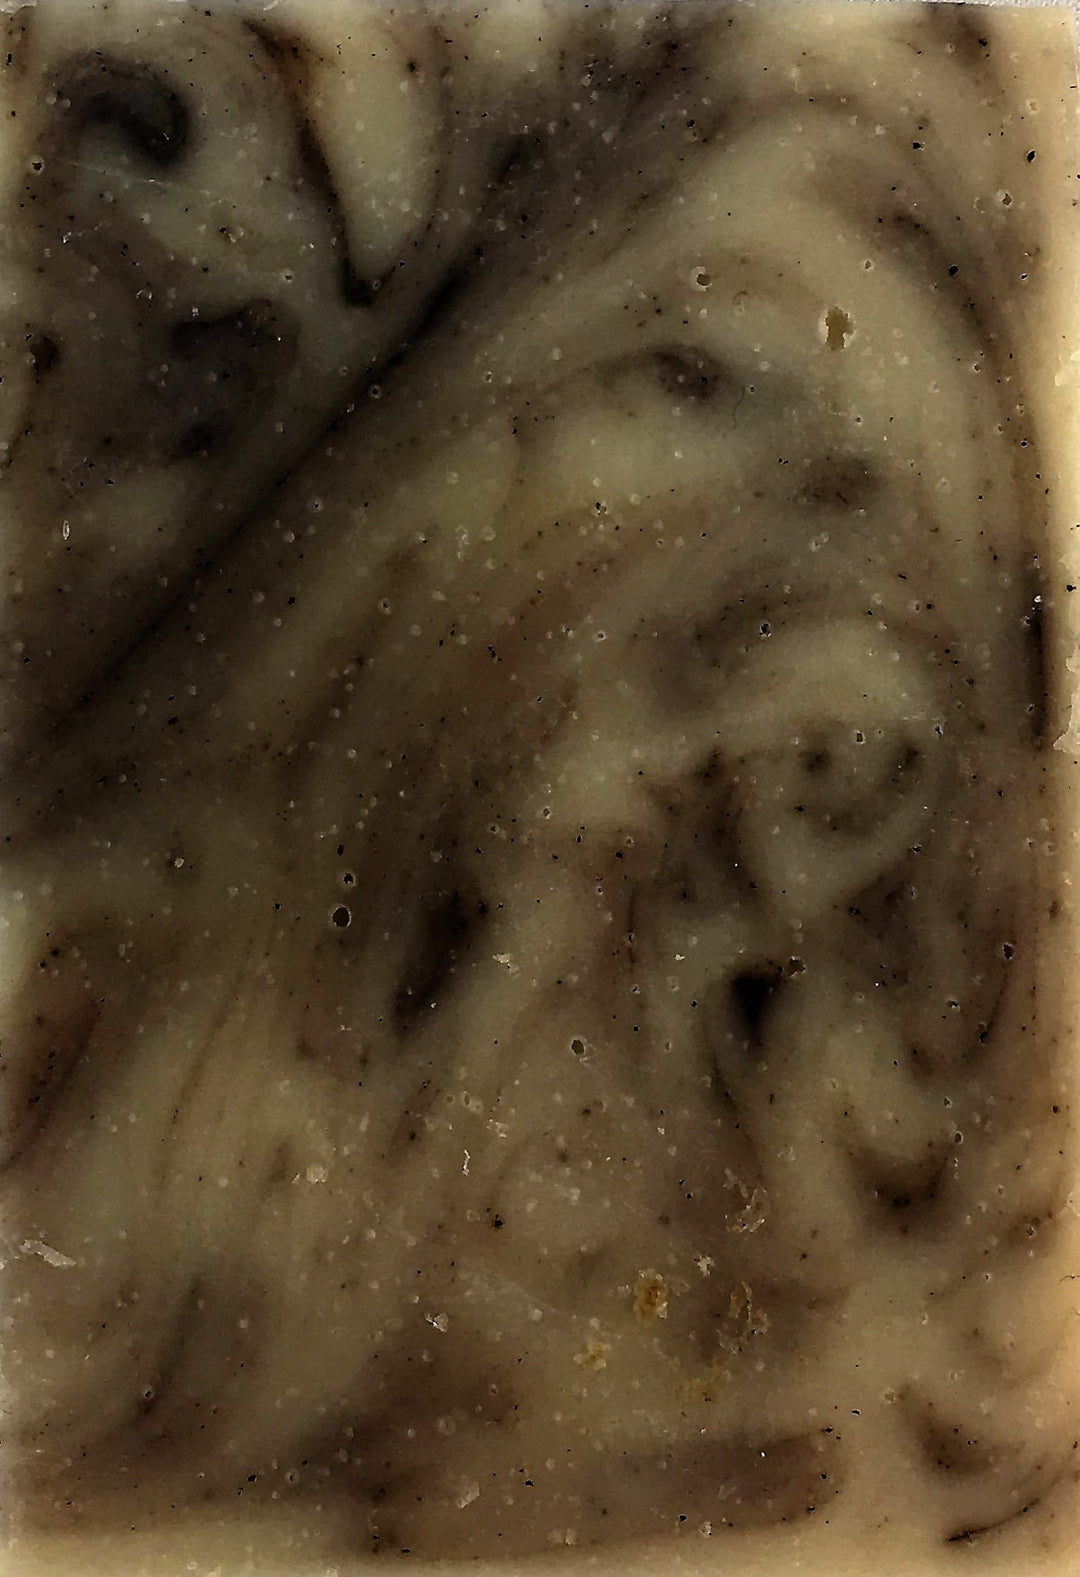 Patchouli Swirl Soap from Handmade Naturals